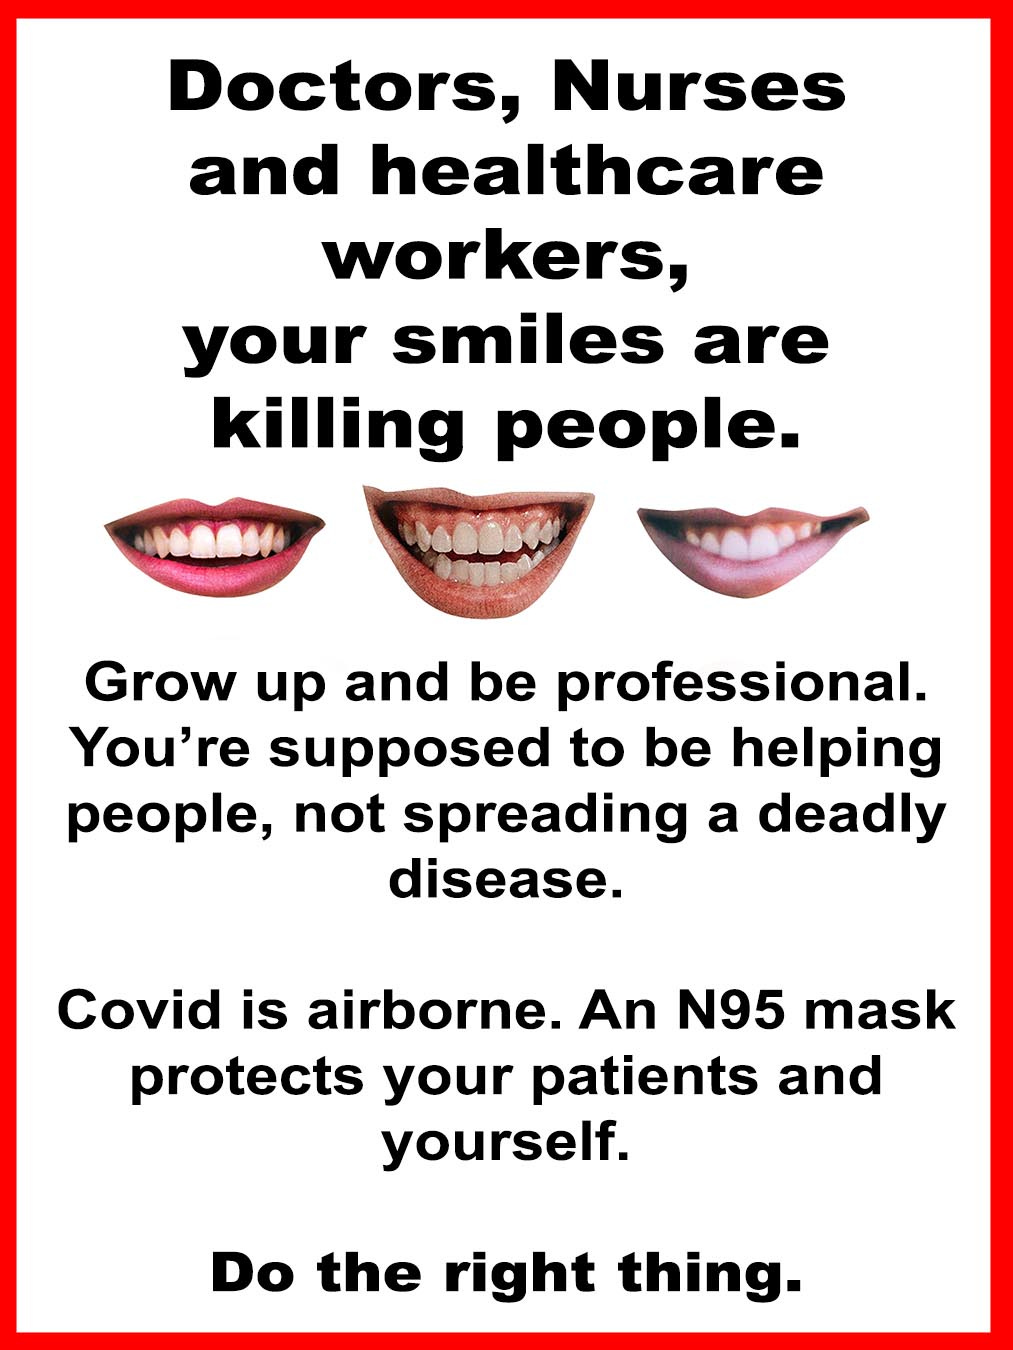 Healthcare workers, your smiles are killign people.
Grow up anmd be professioanl. You're supposed to be helping people, not spreading a deadly disease. Covid is airborne. An N95 mask protects your patients and yourself. Do the right thing.